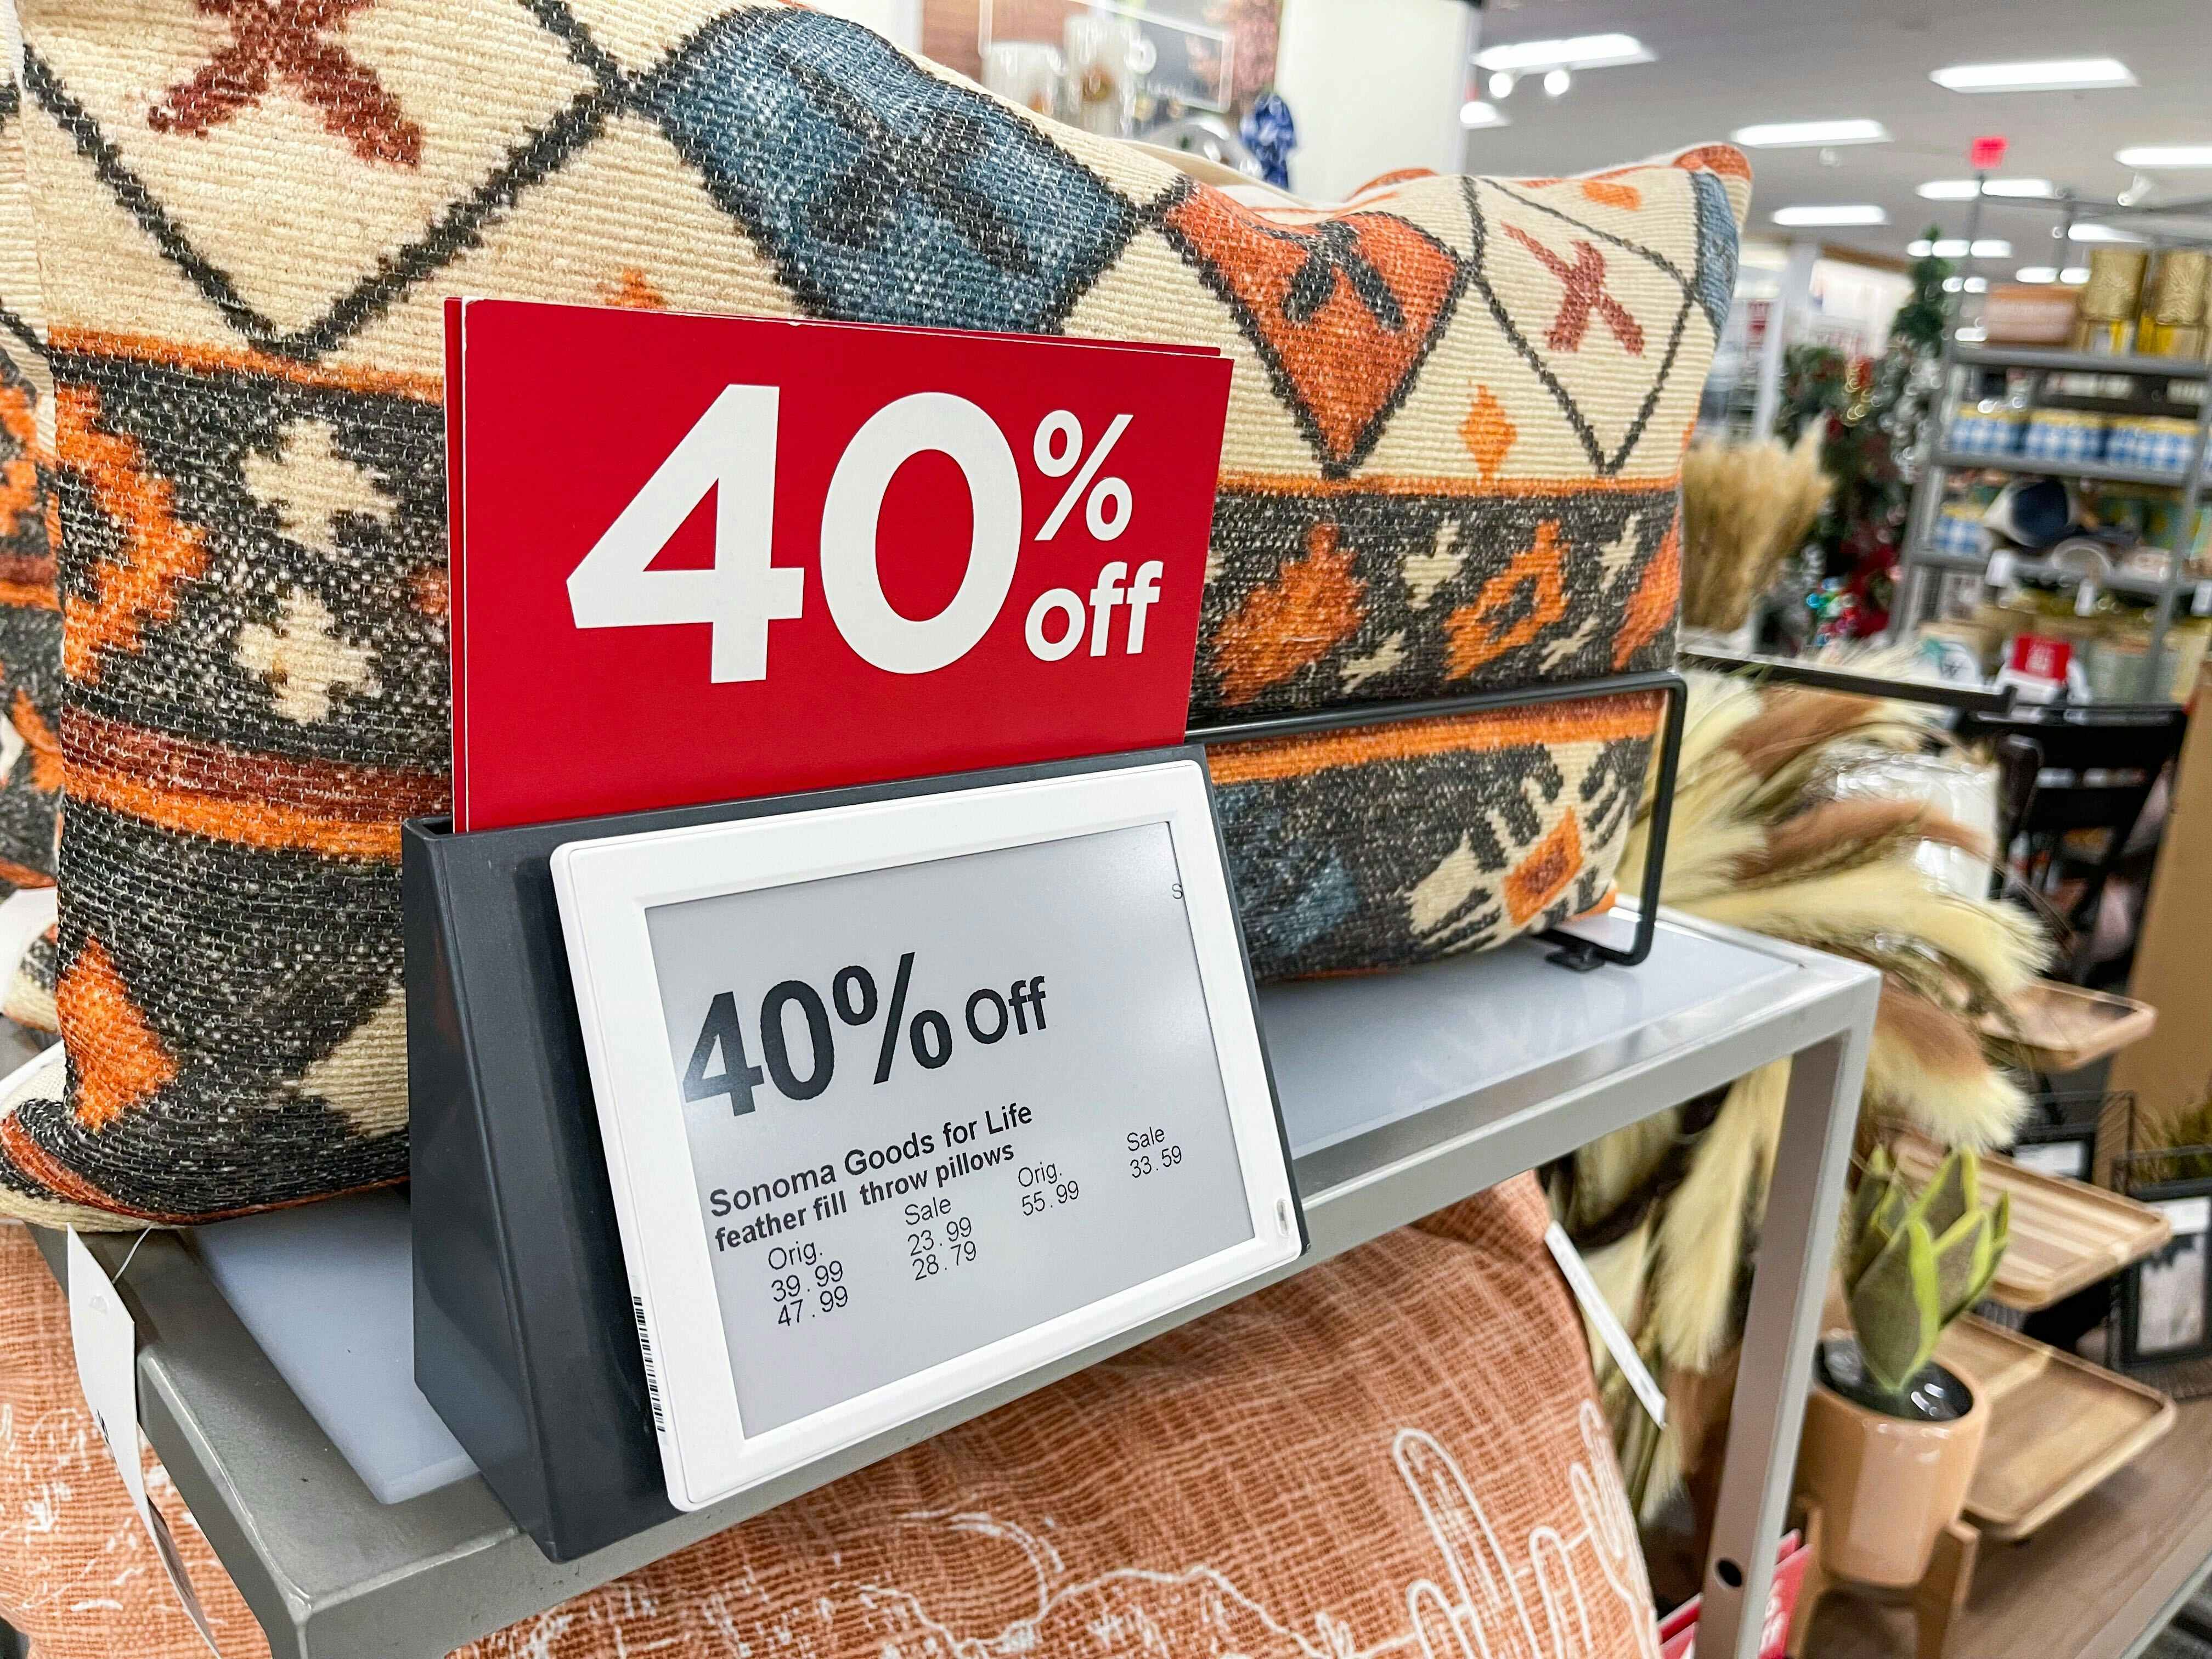 A Kohl's in-store display of farmhouse decor with signage showing it to be 40% off